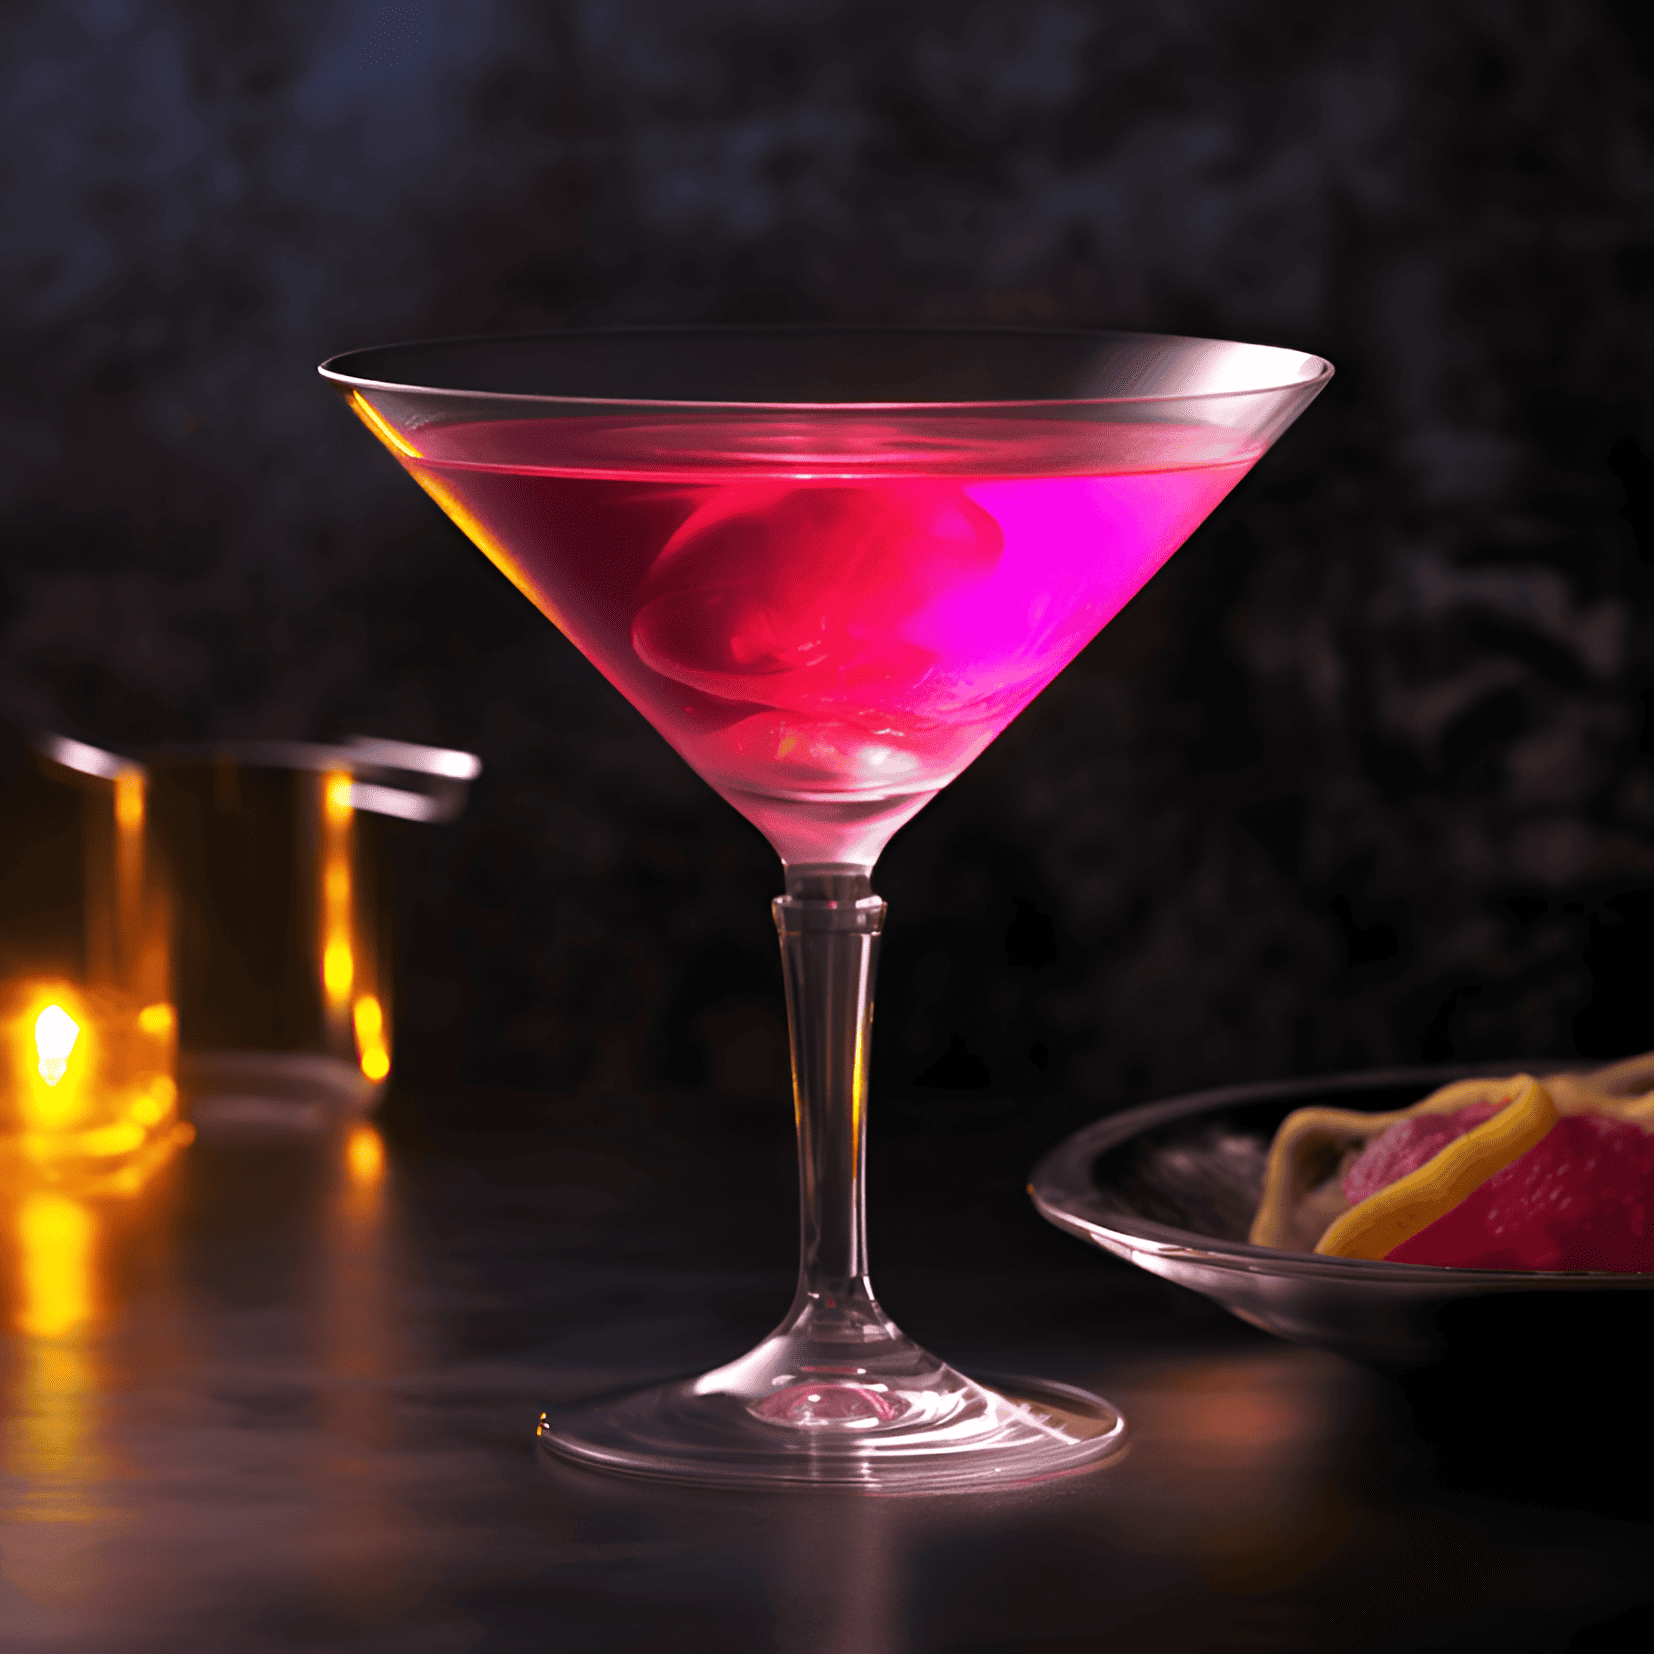 Symphony Cocktail Recipe - The Symphony cocktail offers a harmonious blend of flavors, with a slightly sweet and fruity taste, balanced by a subtle tartness. The overall flavor profile is smooth, refreshing, and sophisticated.